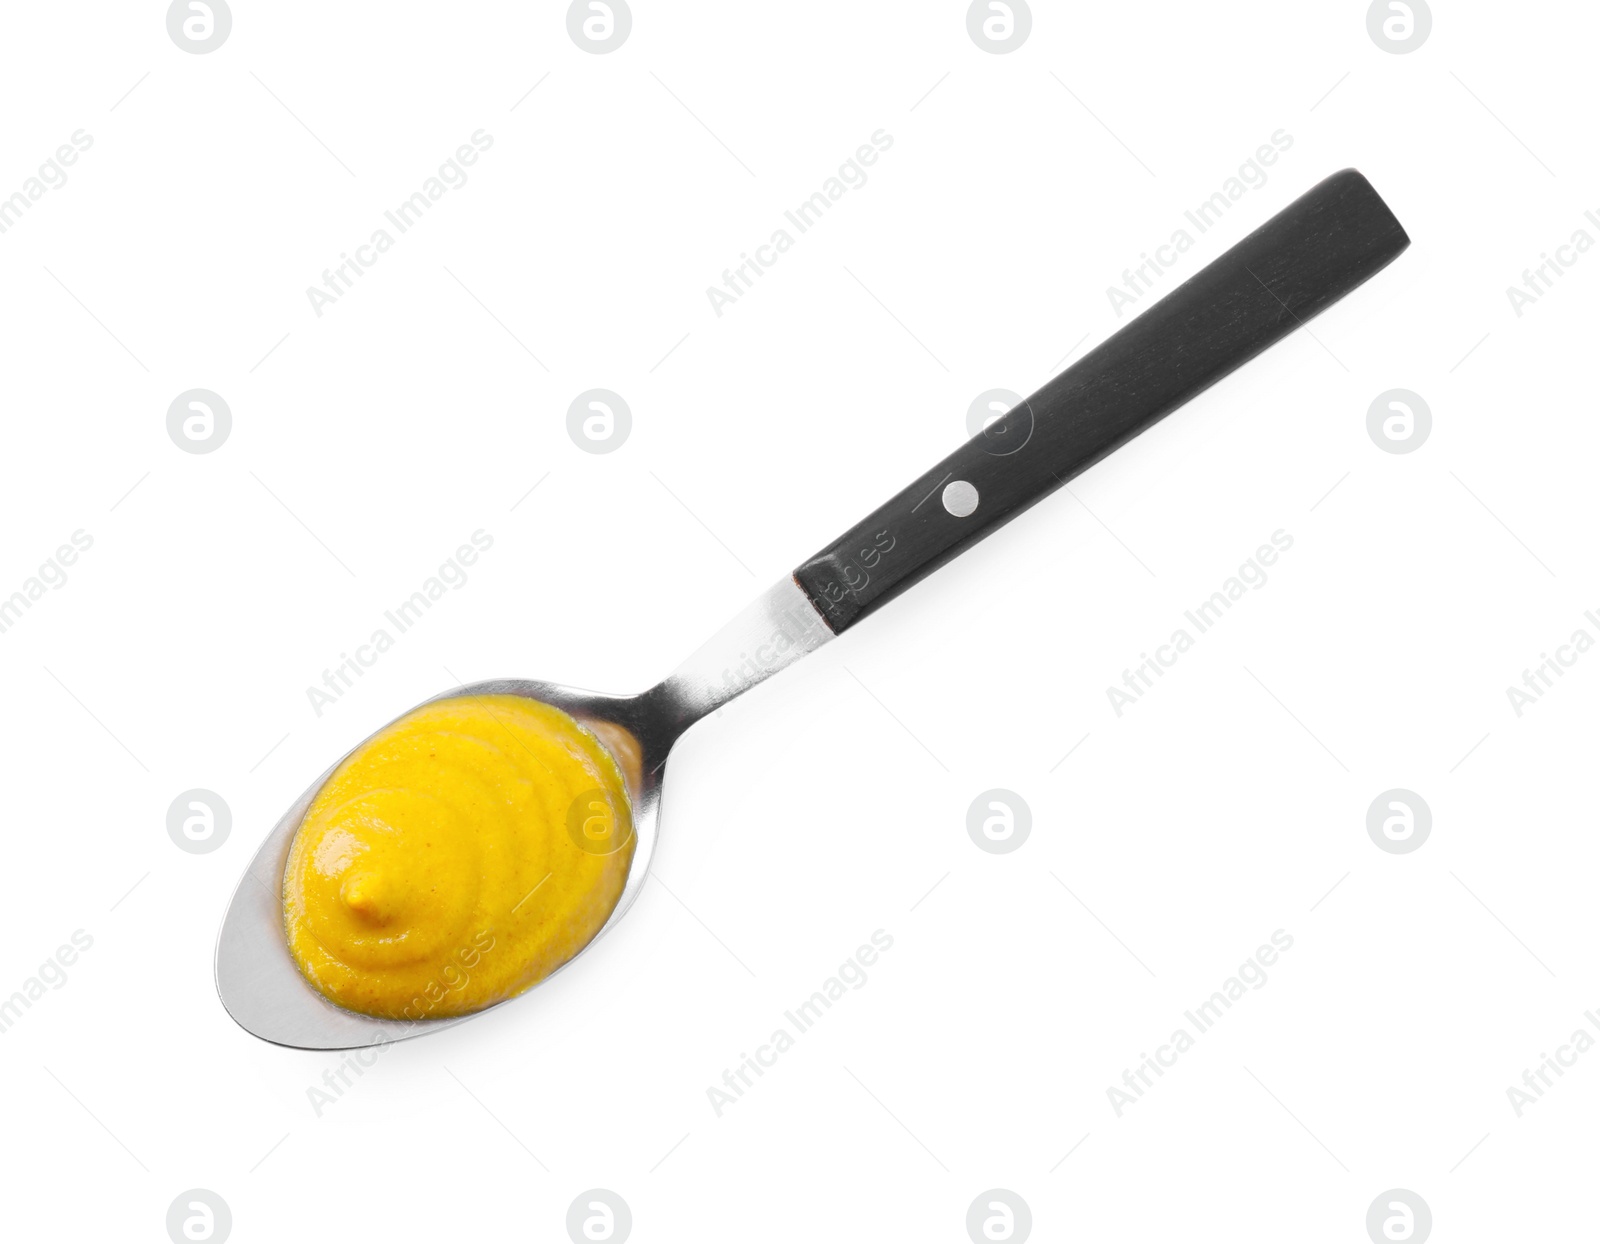 Photo of Fresh tasty mustard sauce in spoon isolated on white, top view